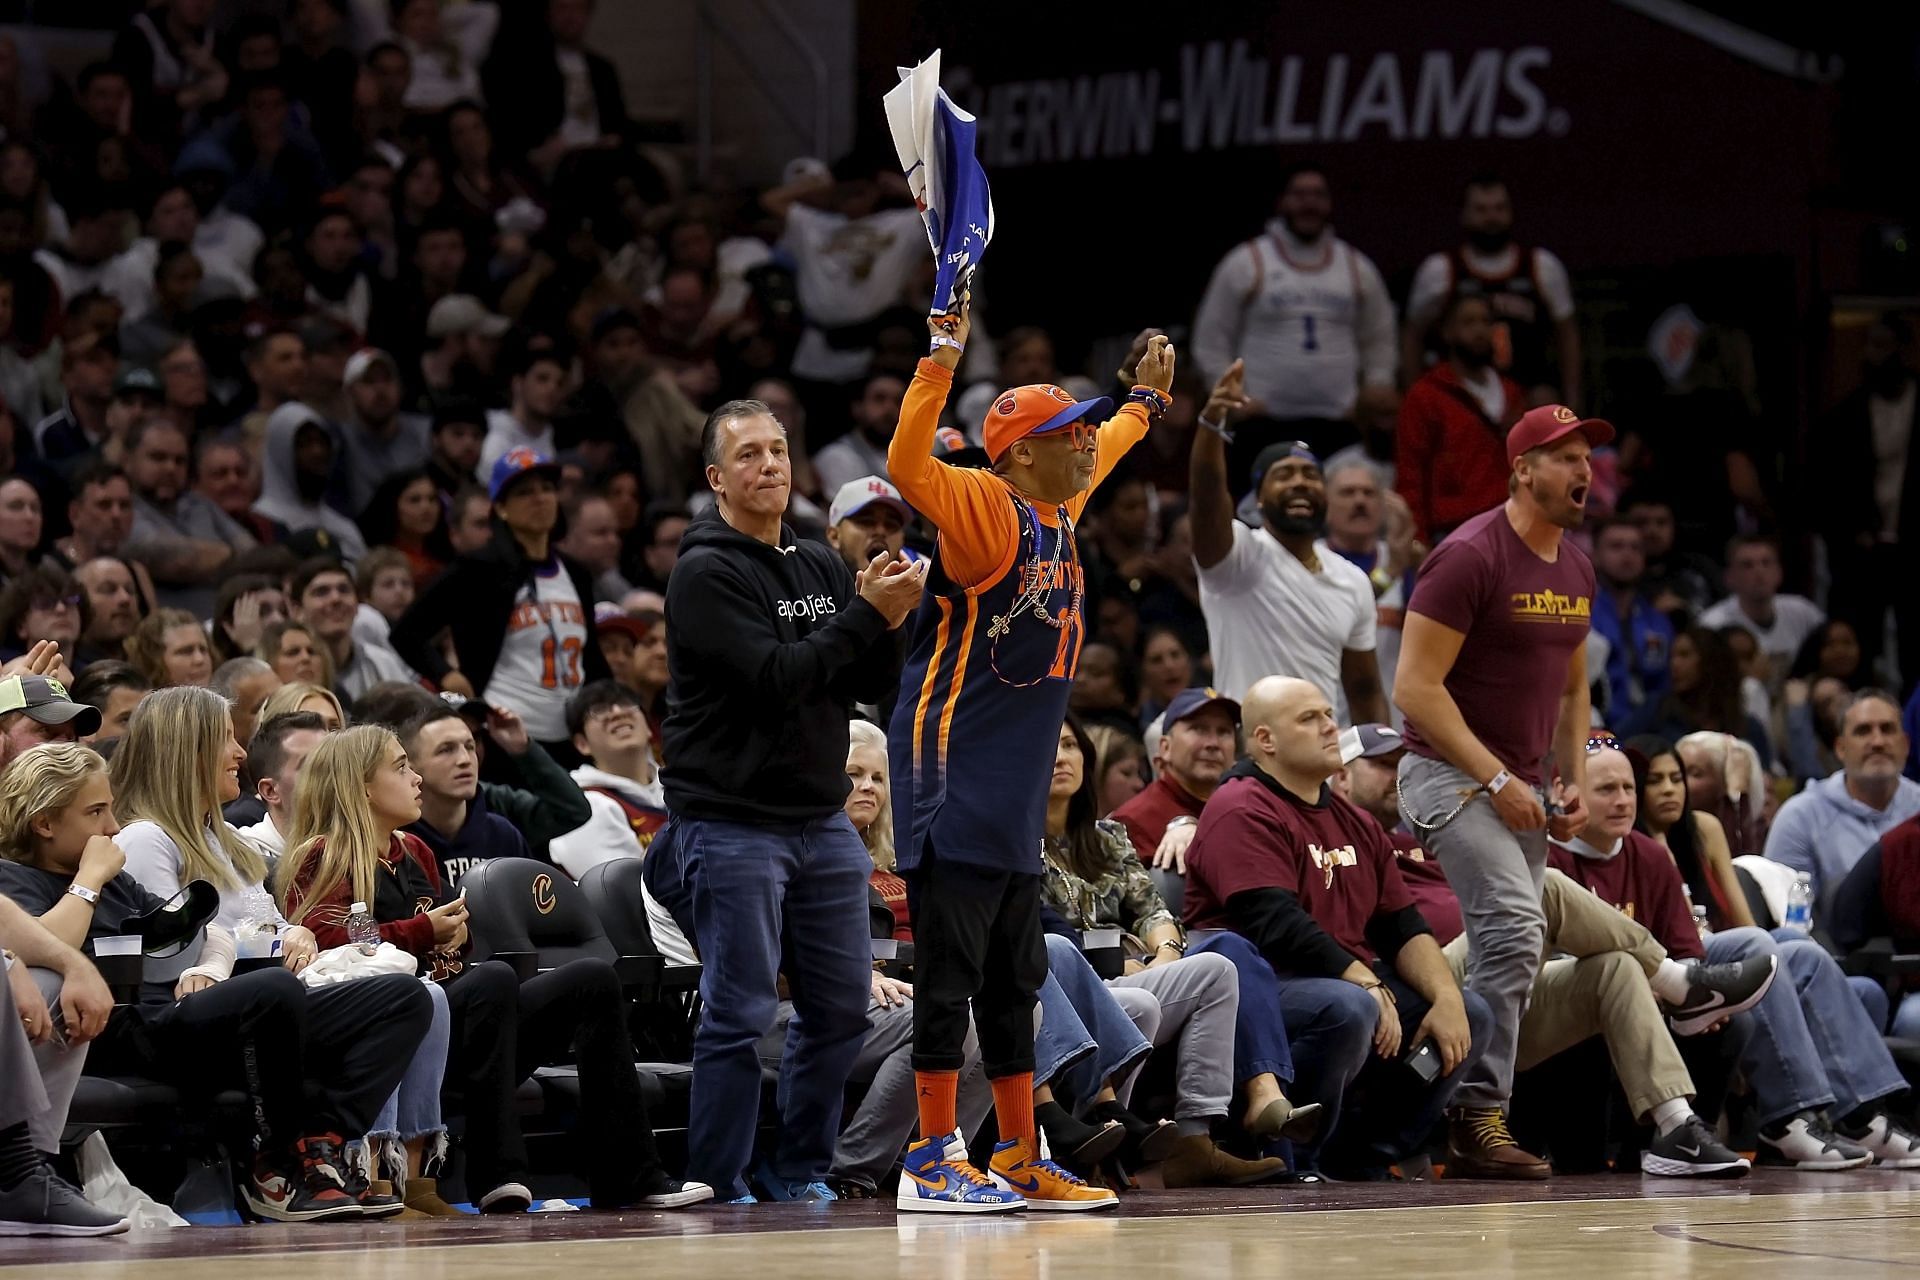 Spike Lee celebrating the New York Knicks&#039; first-round series win against the &lt;a href=&#039;https://www.sportskeeda.com/basketball/cleveland-cavaliers&#039; target=&#039;_blank&#039; rel=&#039;noopener noreferrer&#039;&gt;Cleveland Cavaliers&lt;/a&gt; on Wednesday night